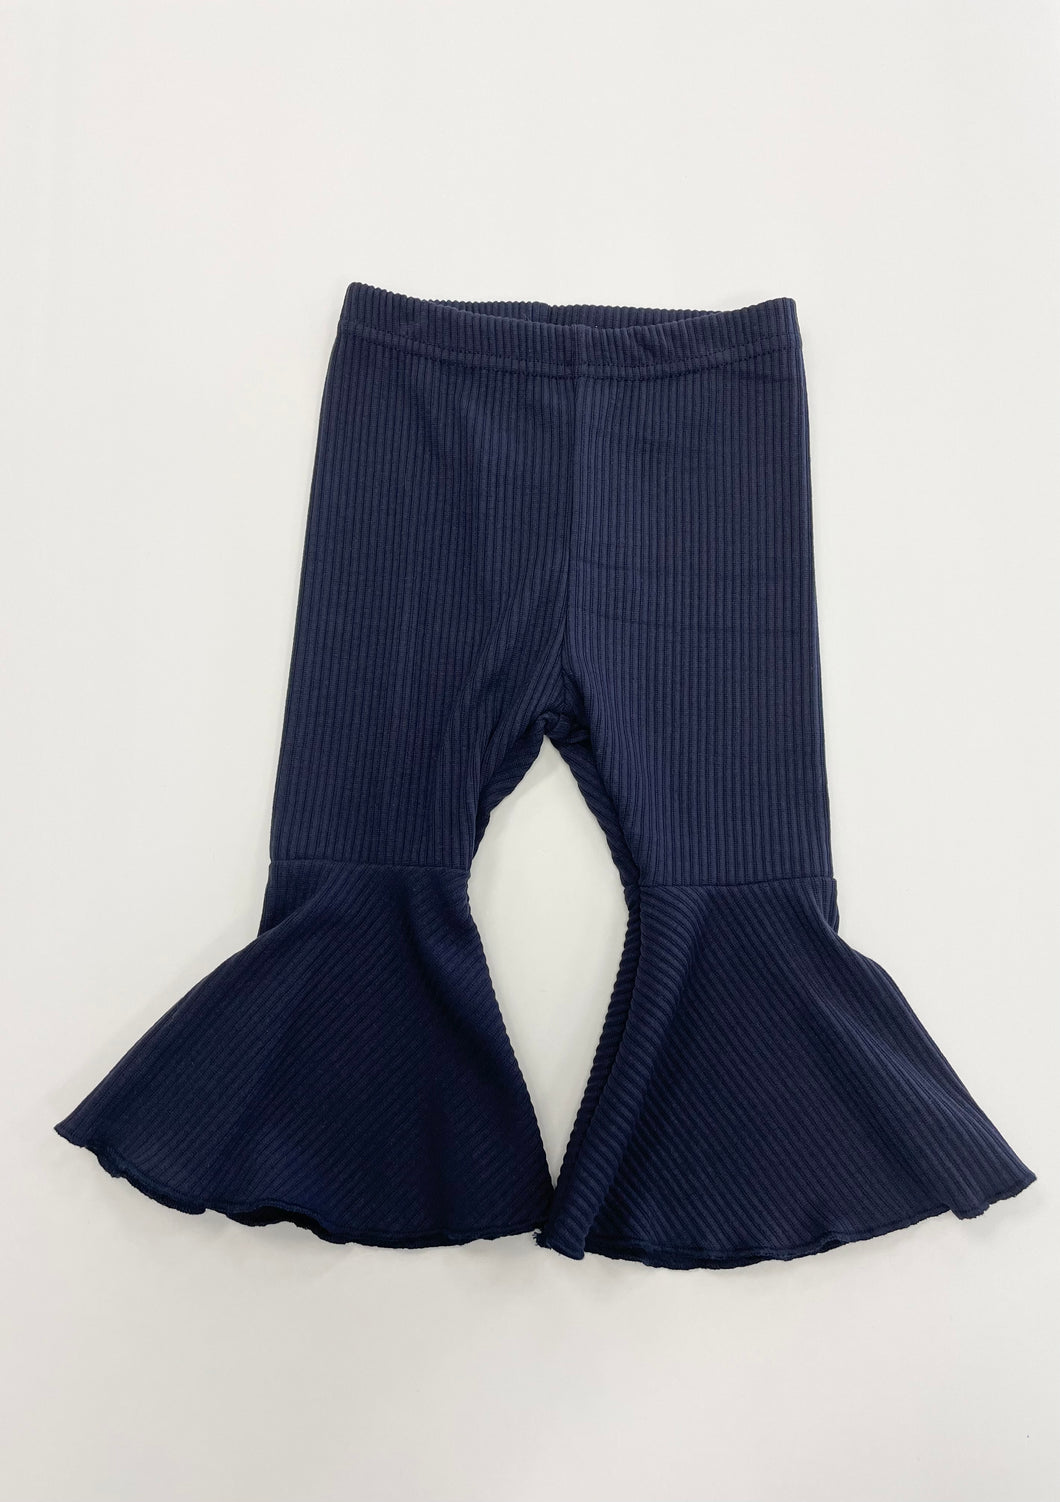 Navy blue bell bottoms with ribbed texture and elastic waistband. 